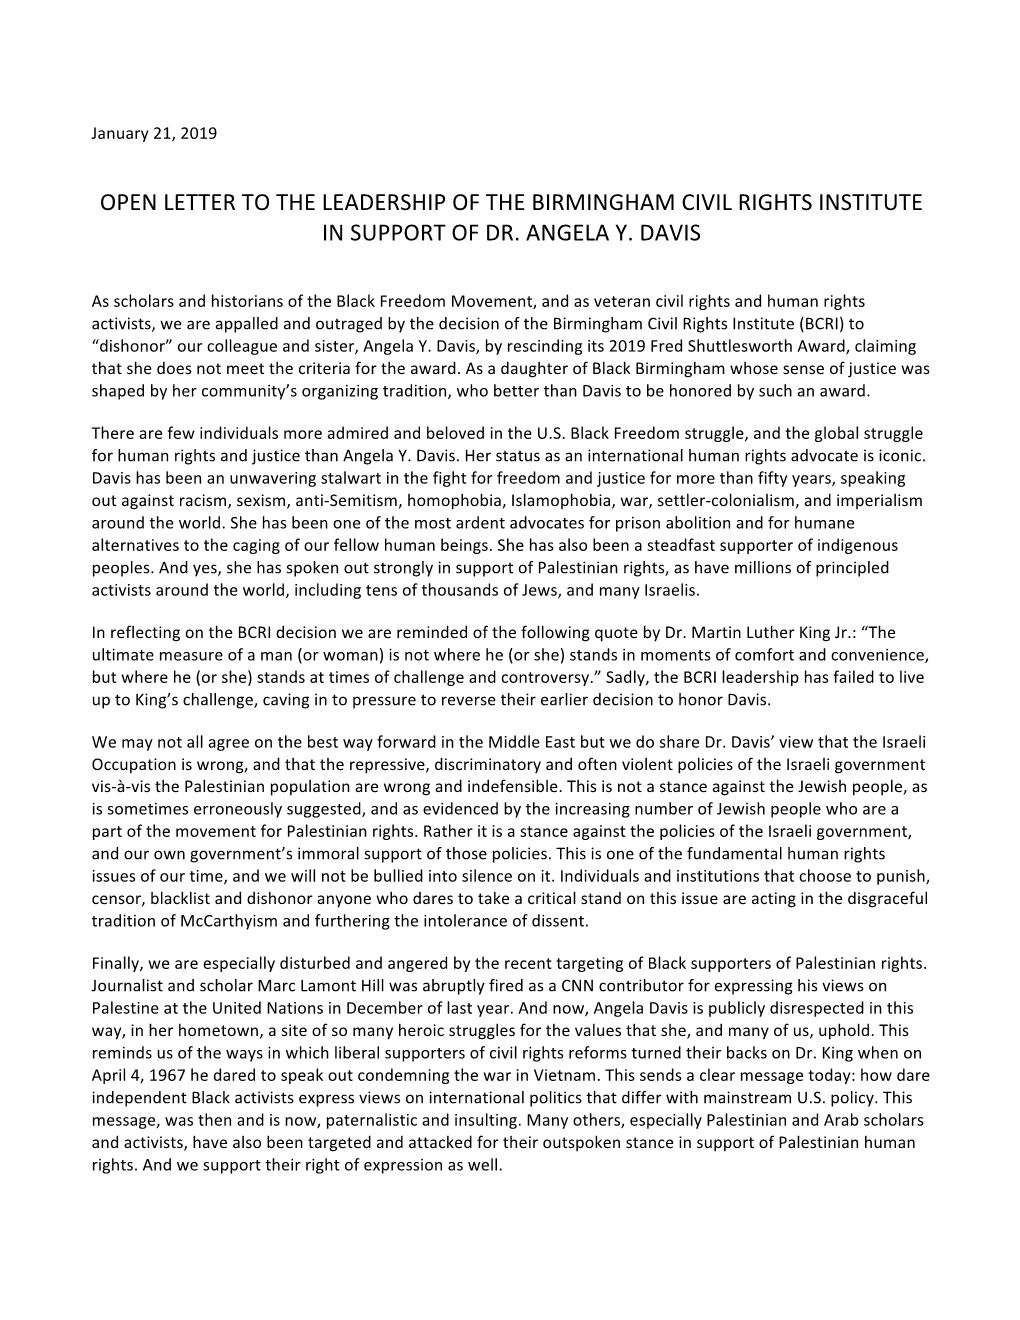 Open Letter to the Leadership of the Birmingham Civil Rights Institute in Support of Dr